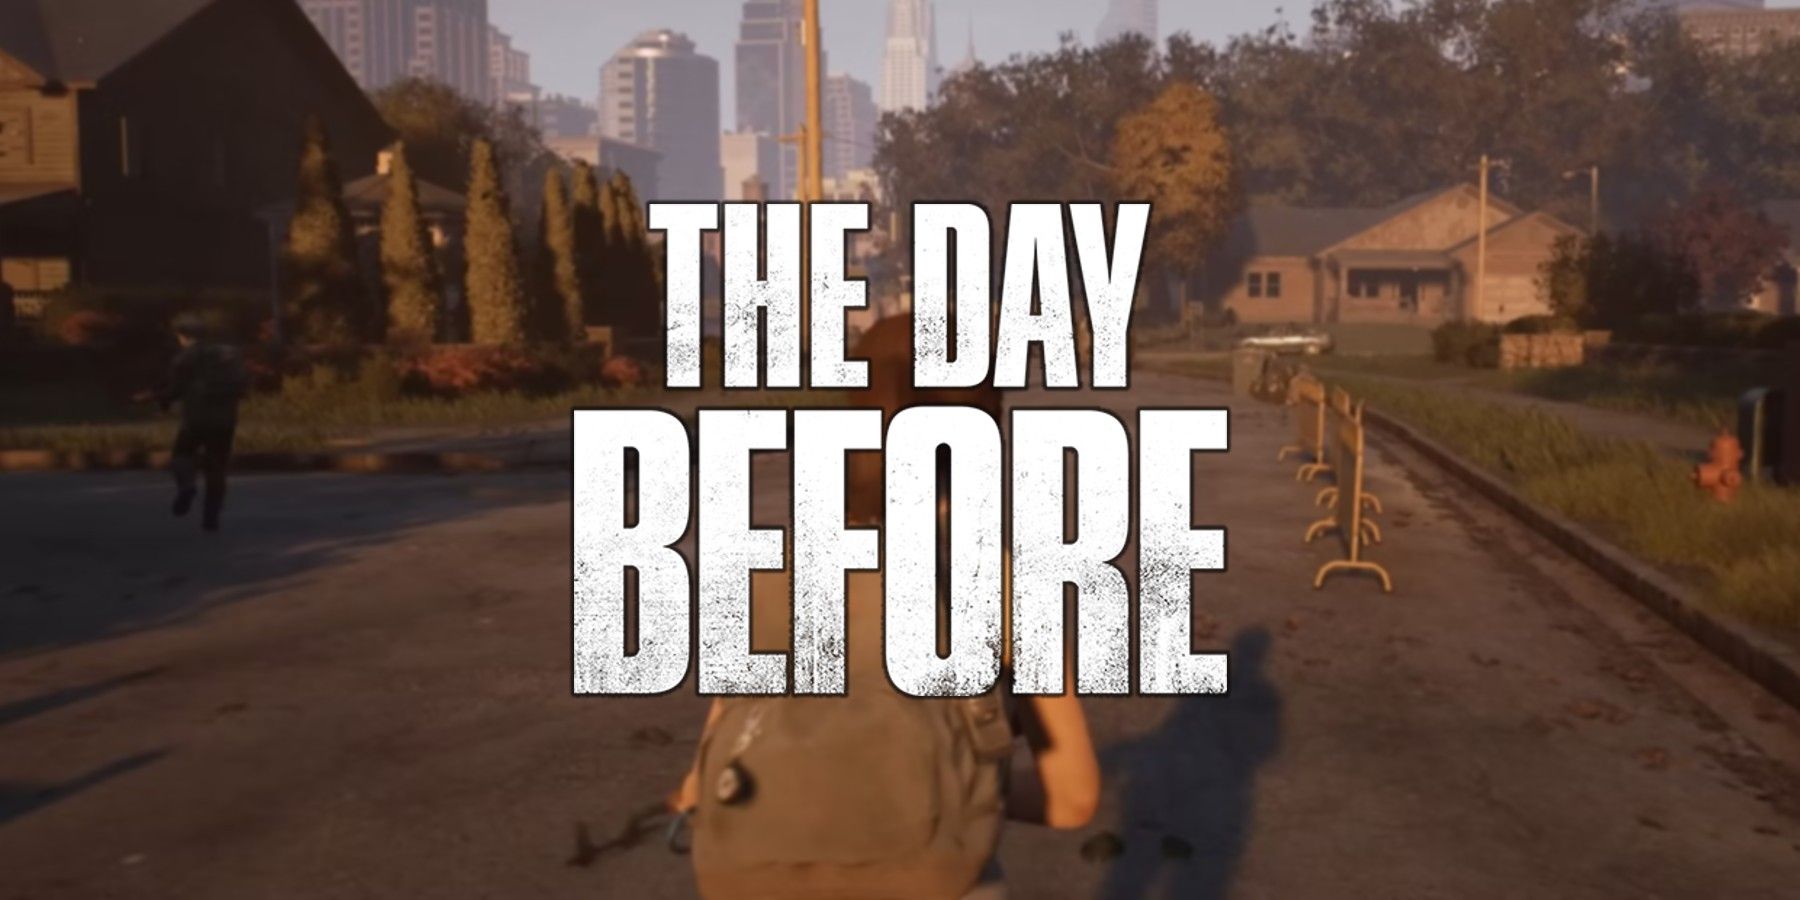 The Day Before is Not an Open-World MMO as Advertised